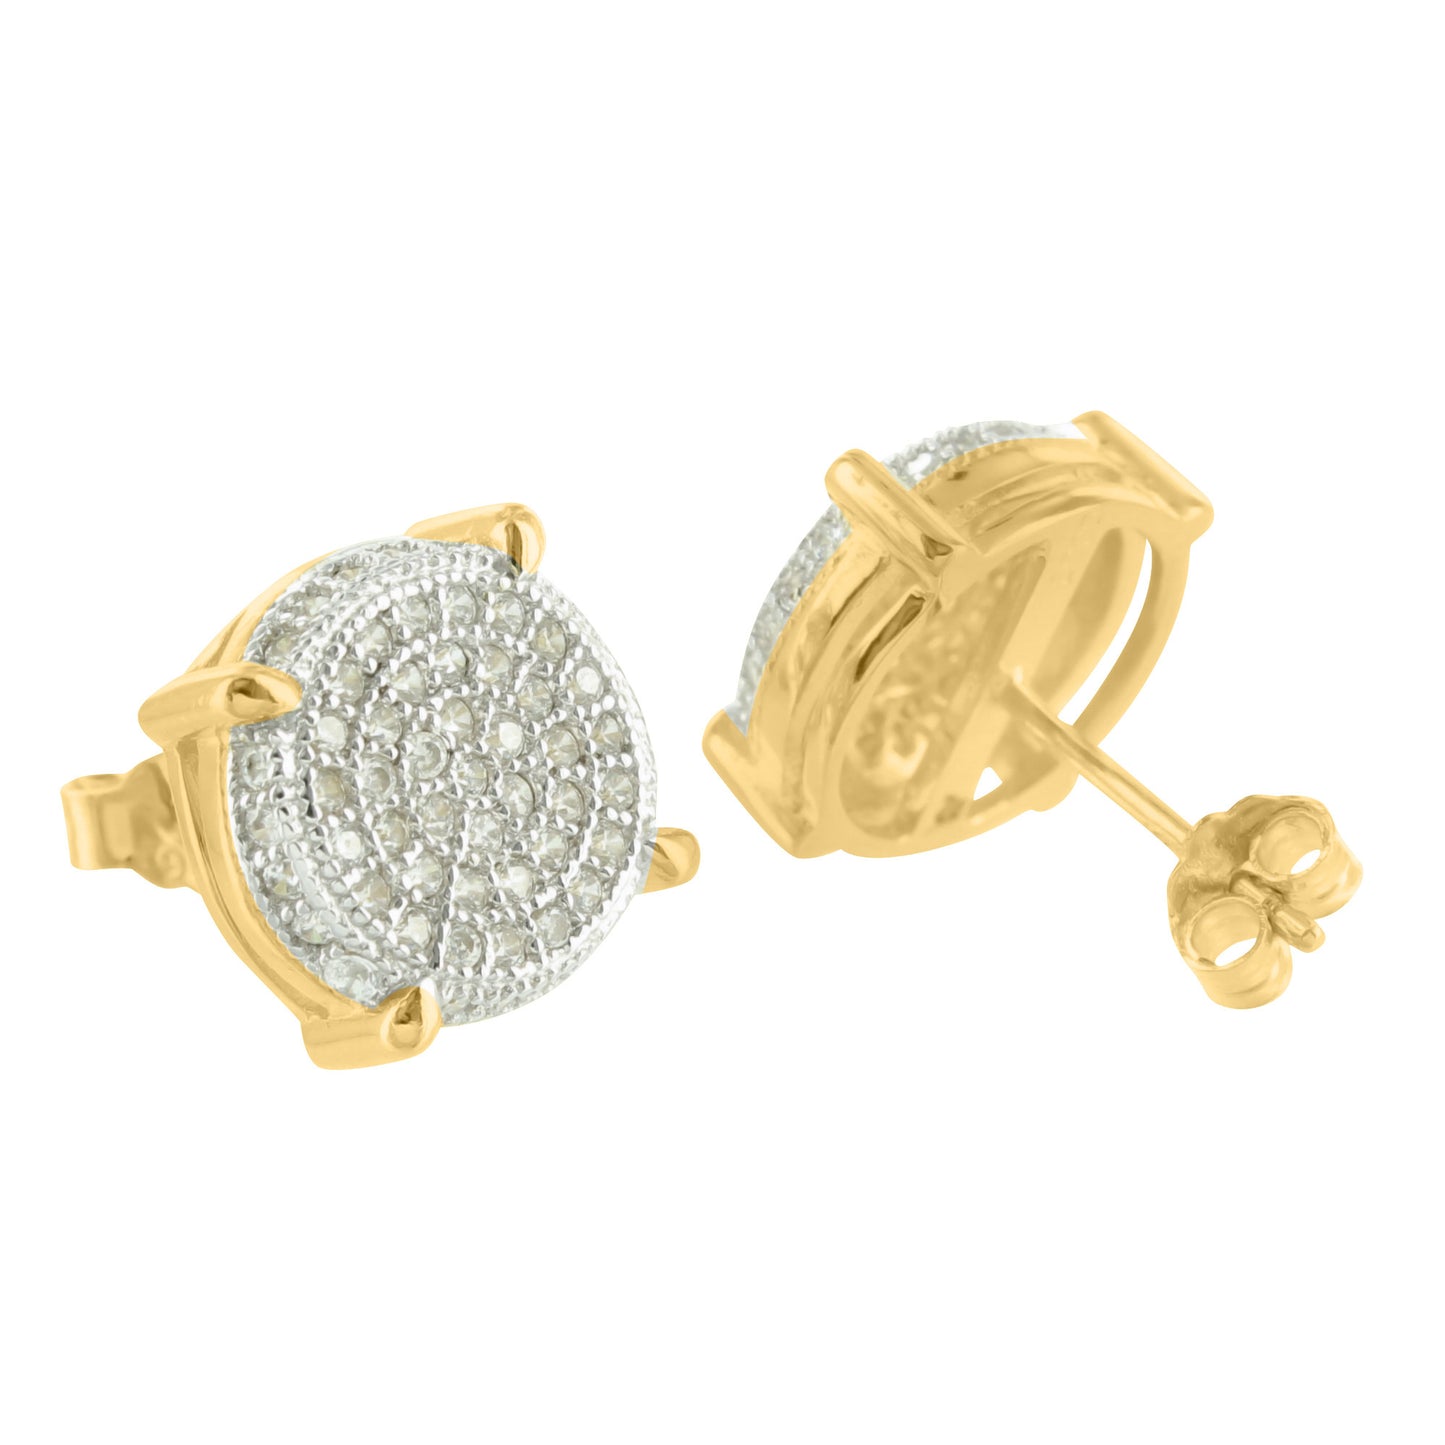 Round Sterling Silver Yellow Gold Finish Lab Diamond Earrings